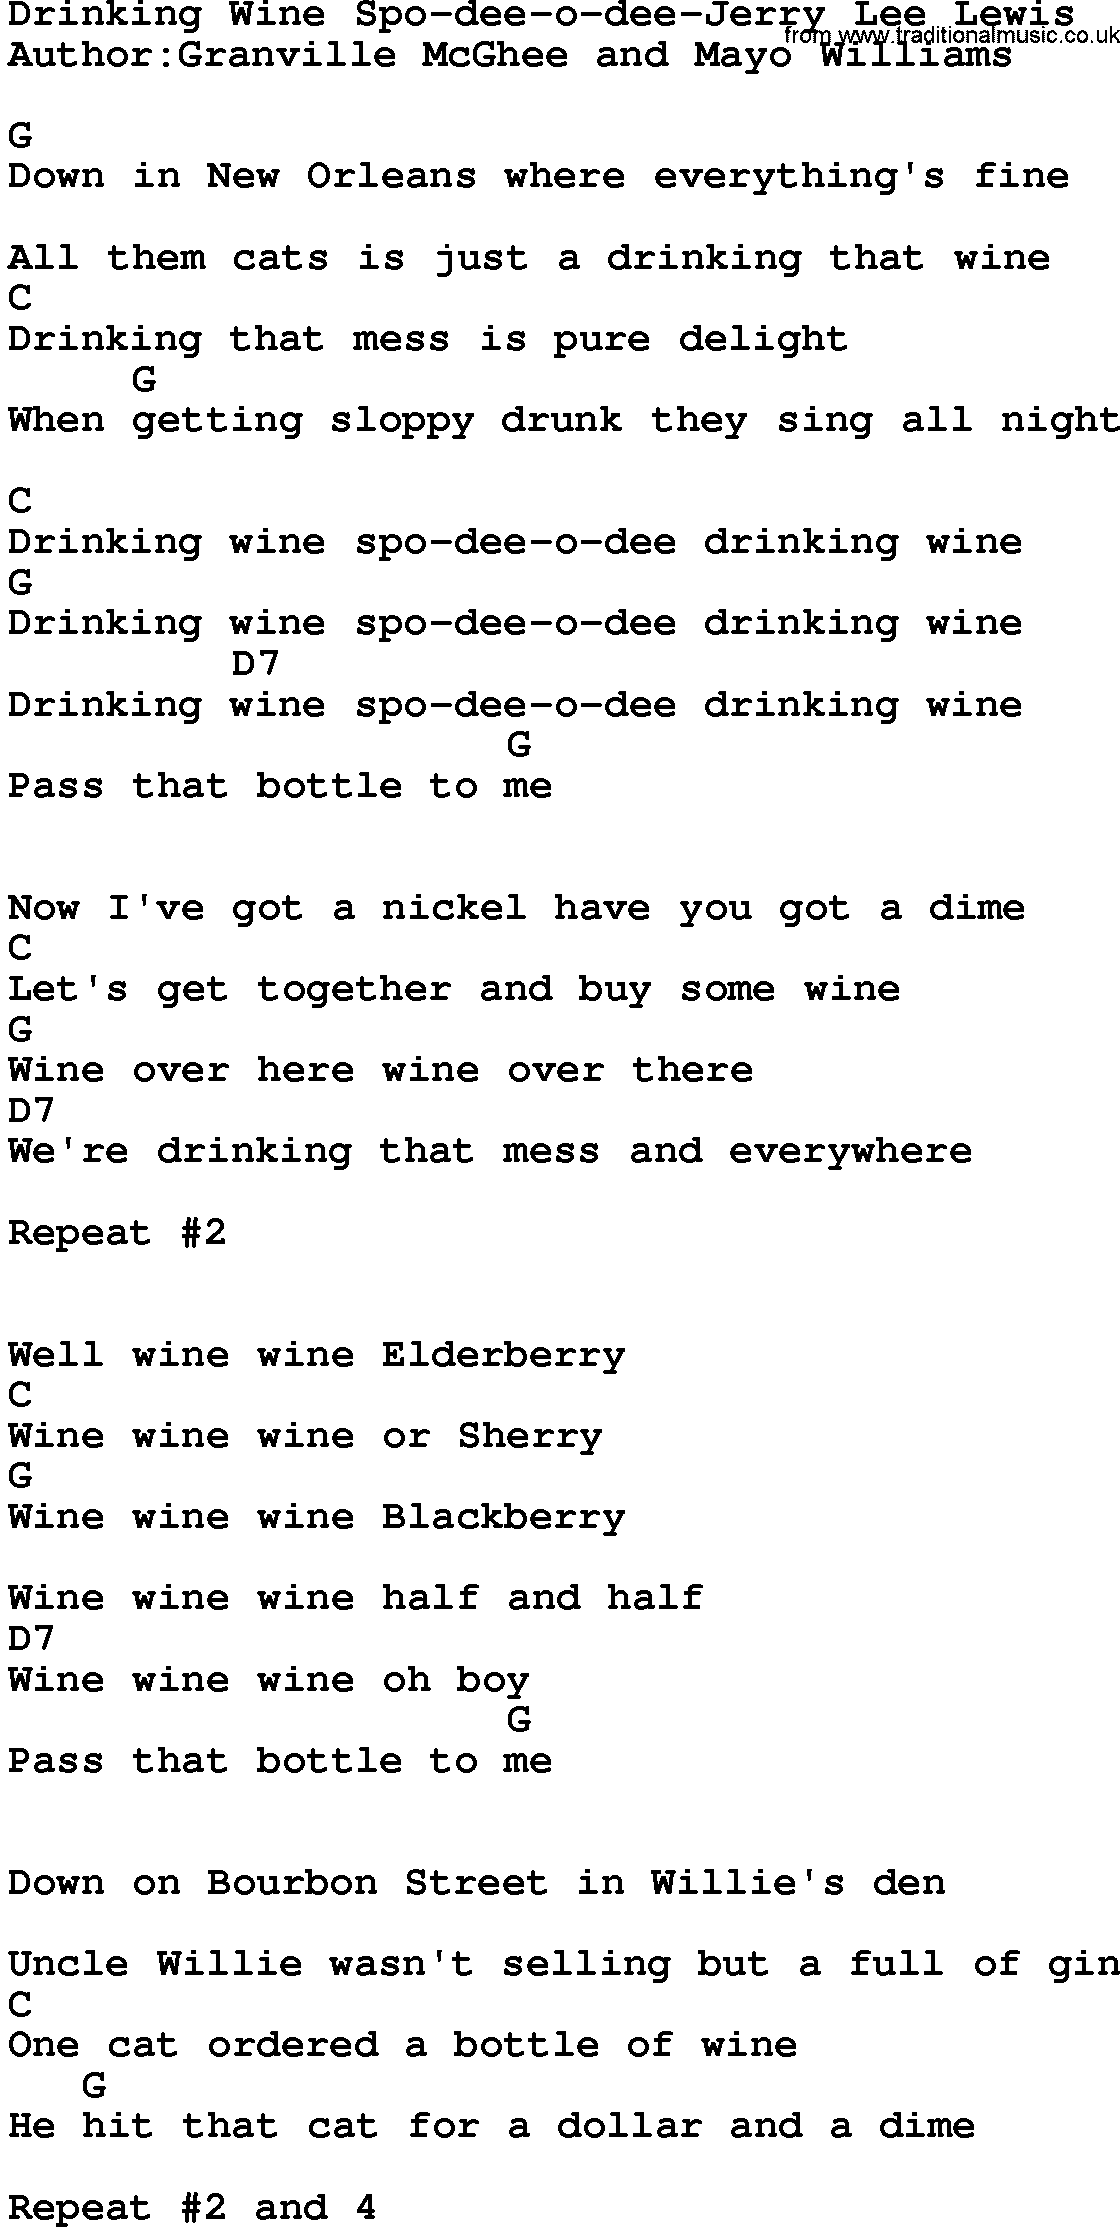 Country music song: Drinking Wine Spo-Dee-O-Dee-Jerry Lee Lewis lyrics and chords